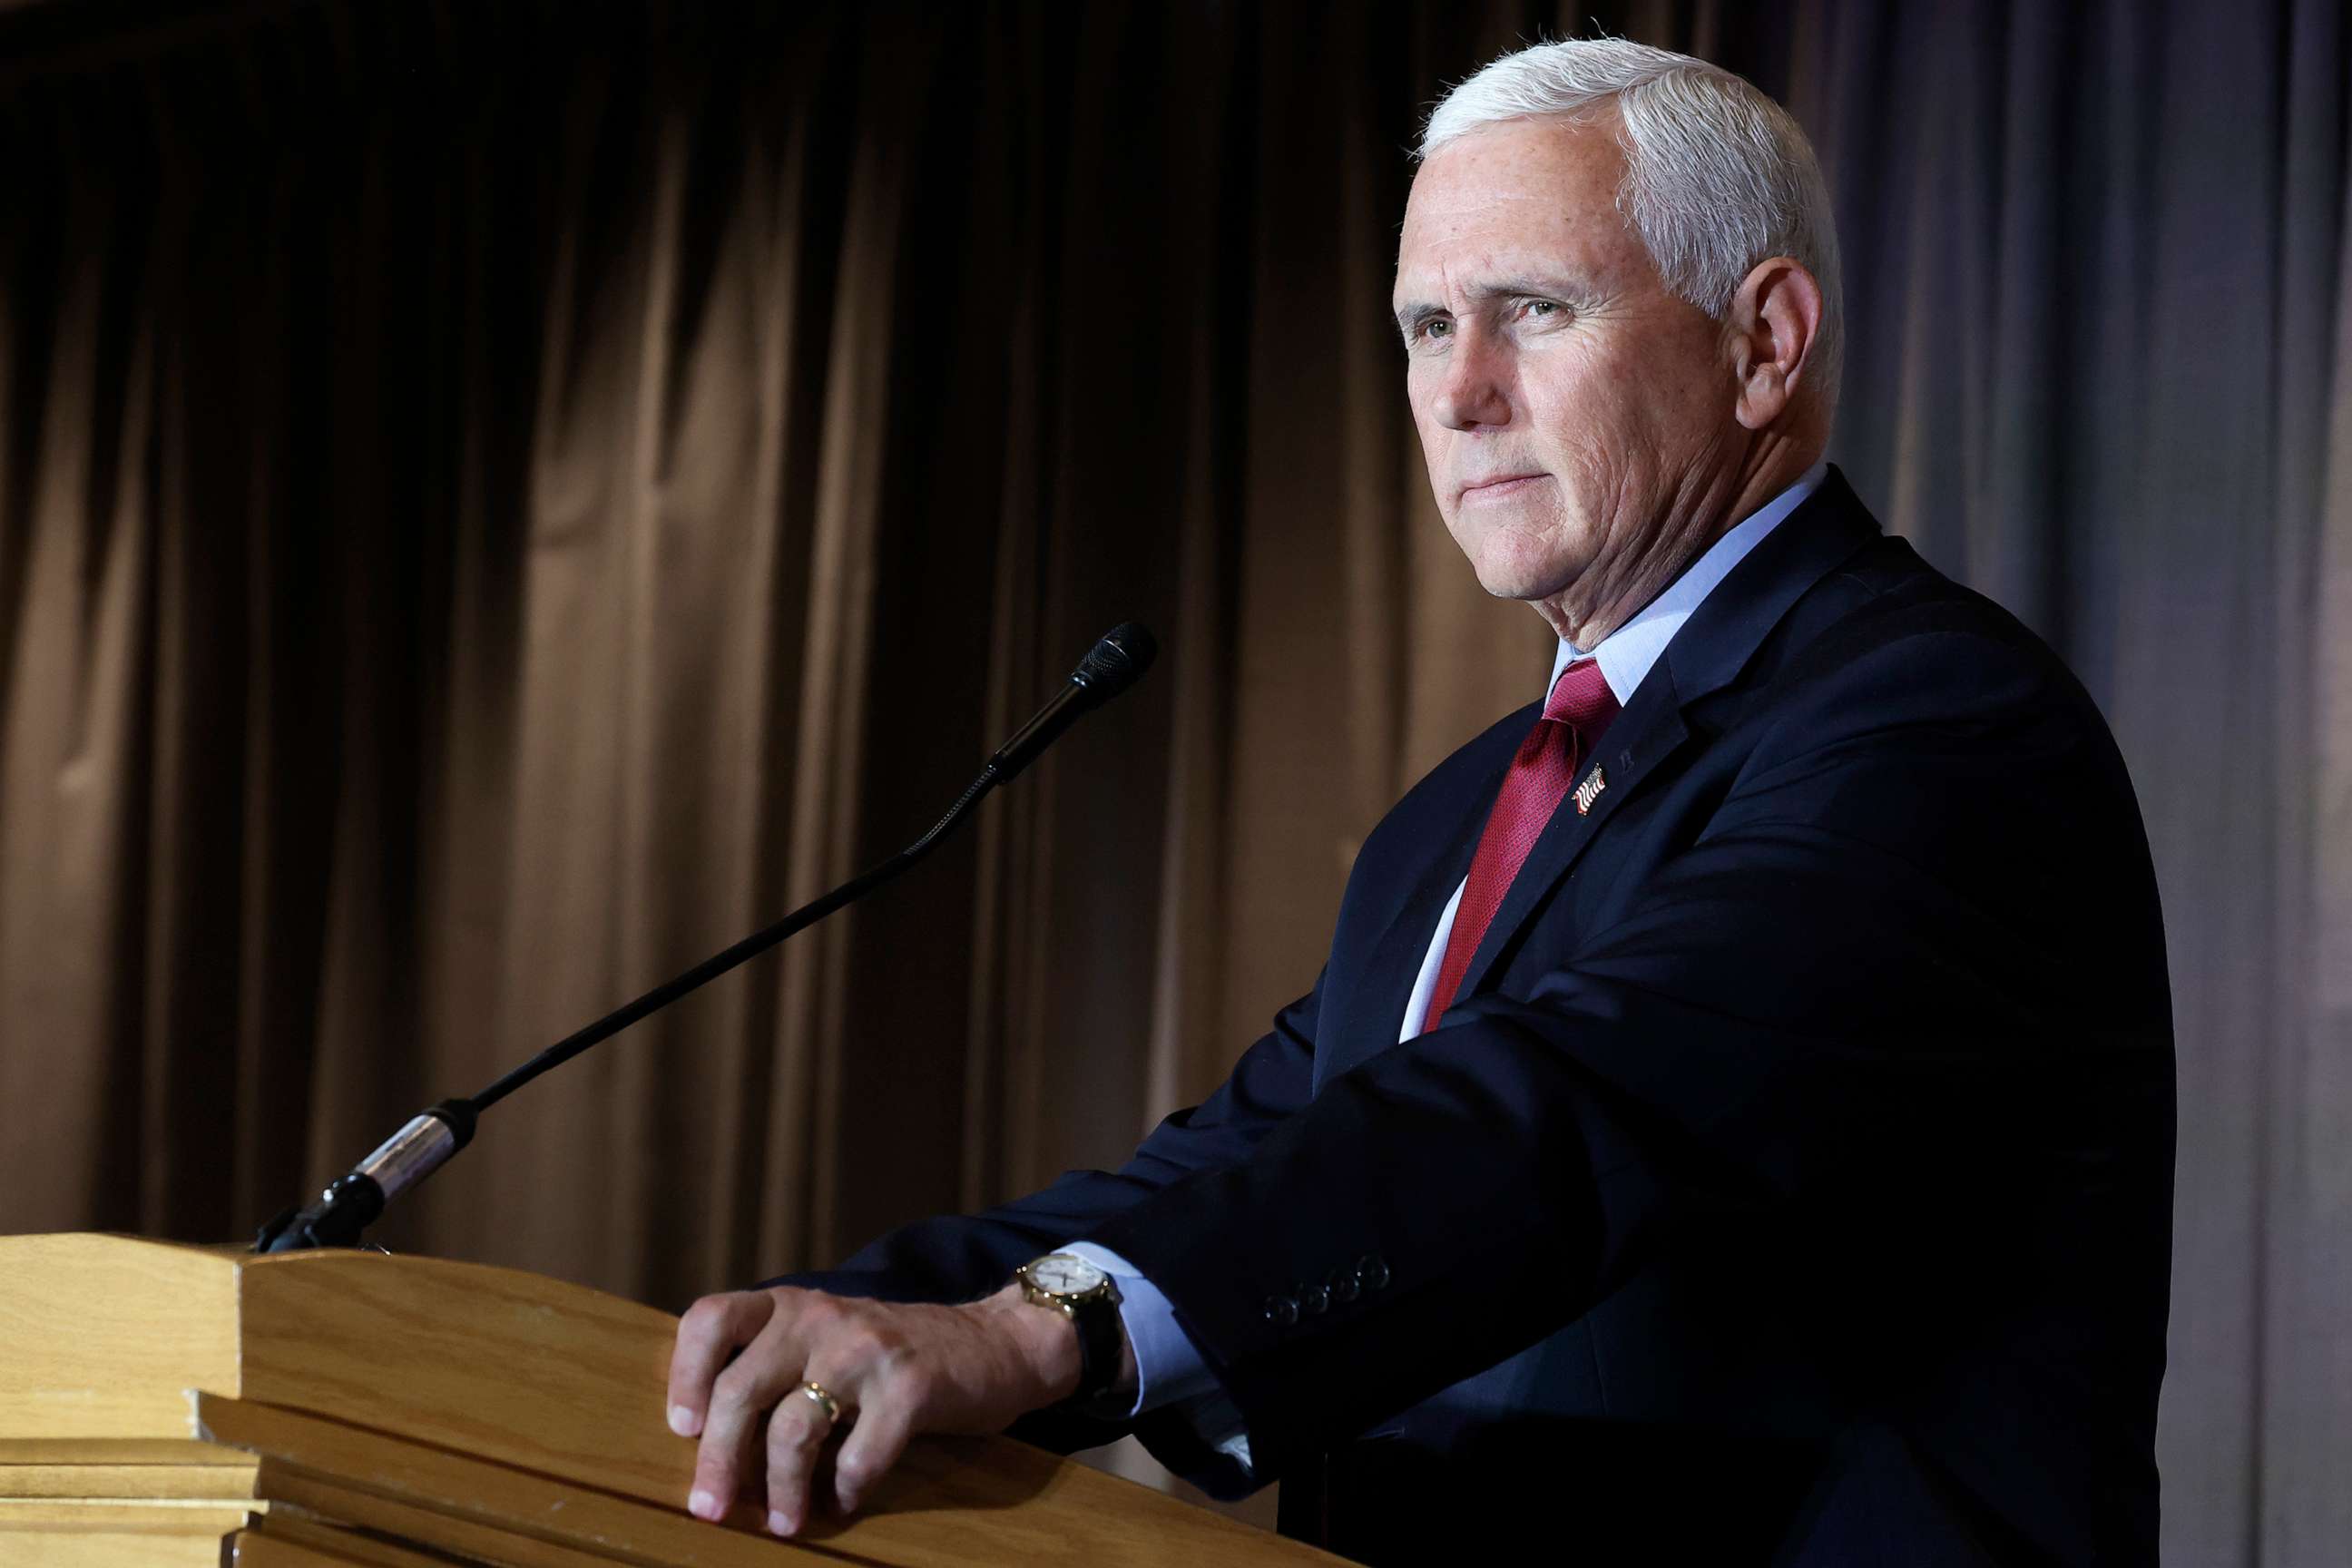 PHOTO: In this Feb. 16, 2023, file photo, former Vice President Mike Pence gives remarks at the Calvin Coolidge Foundation's conference at the Library of Congress in Washington, D.C.